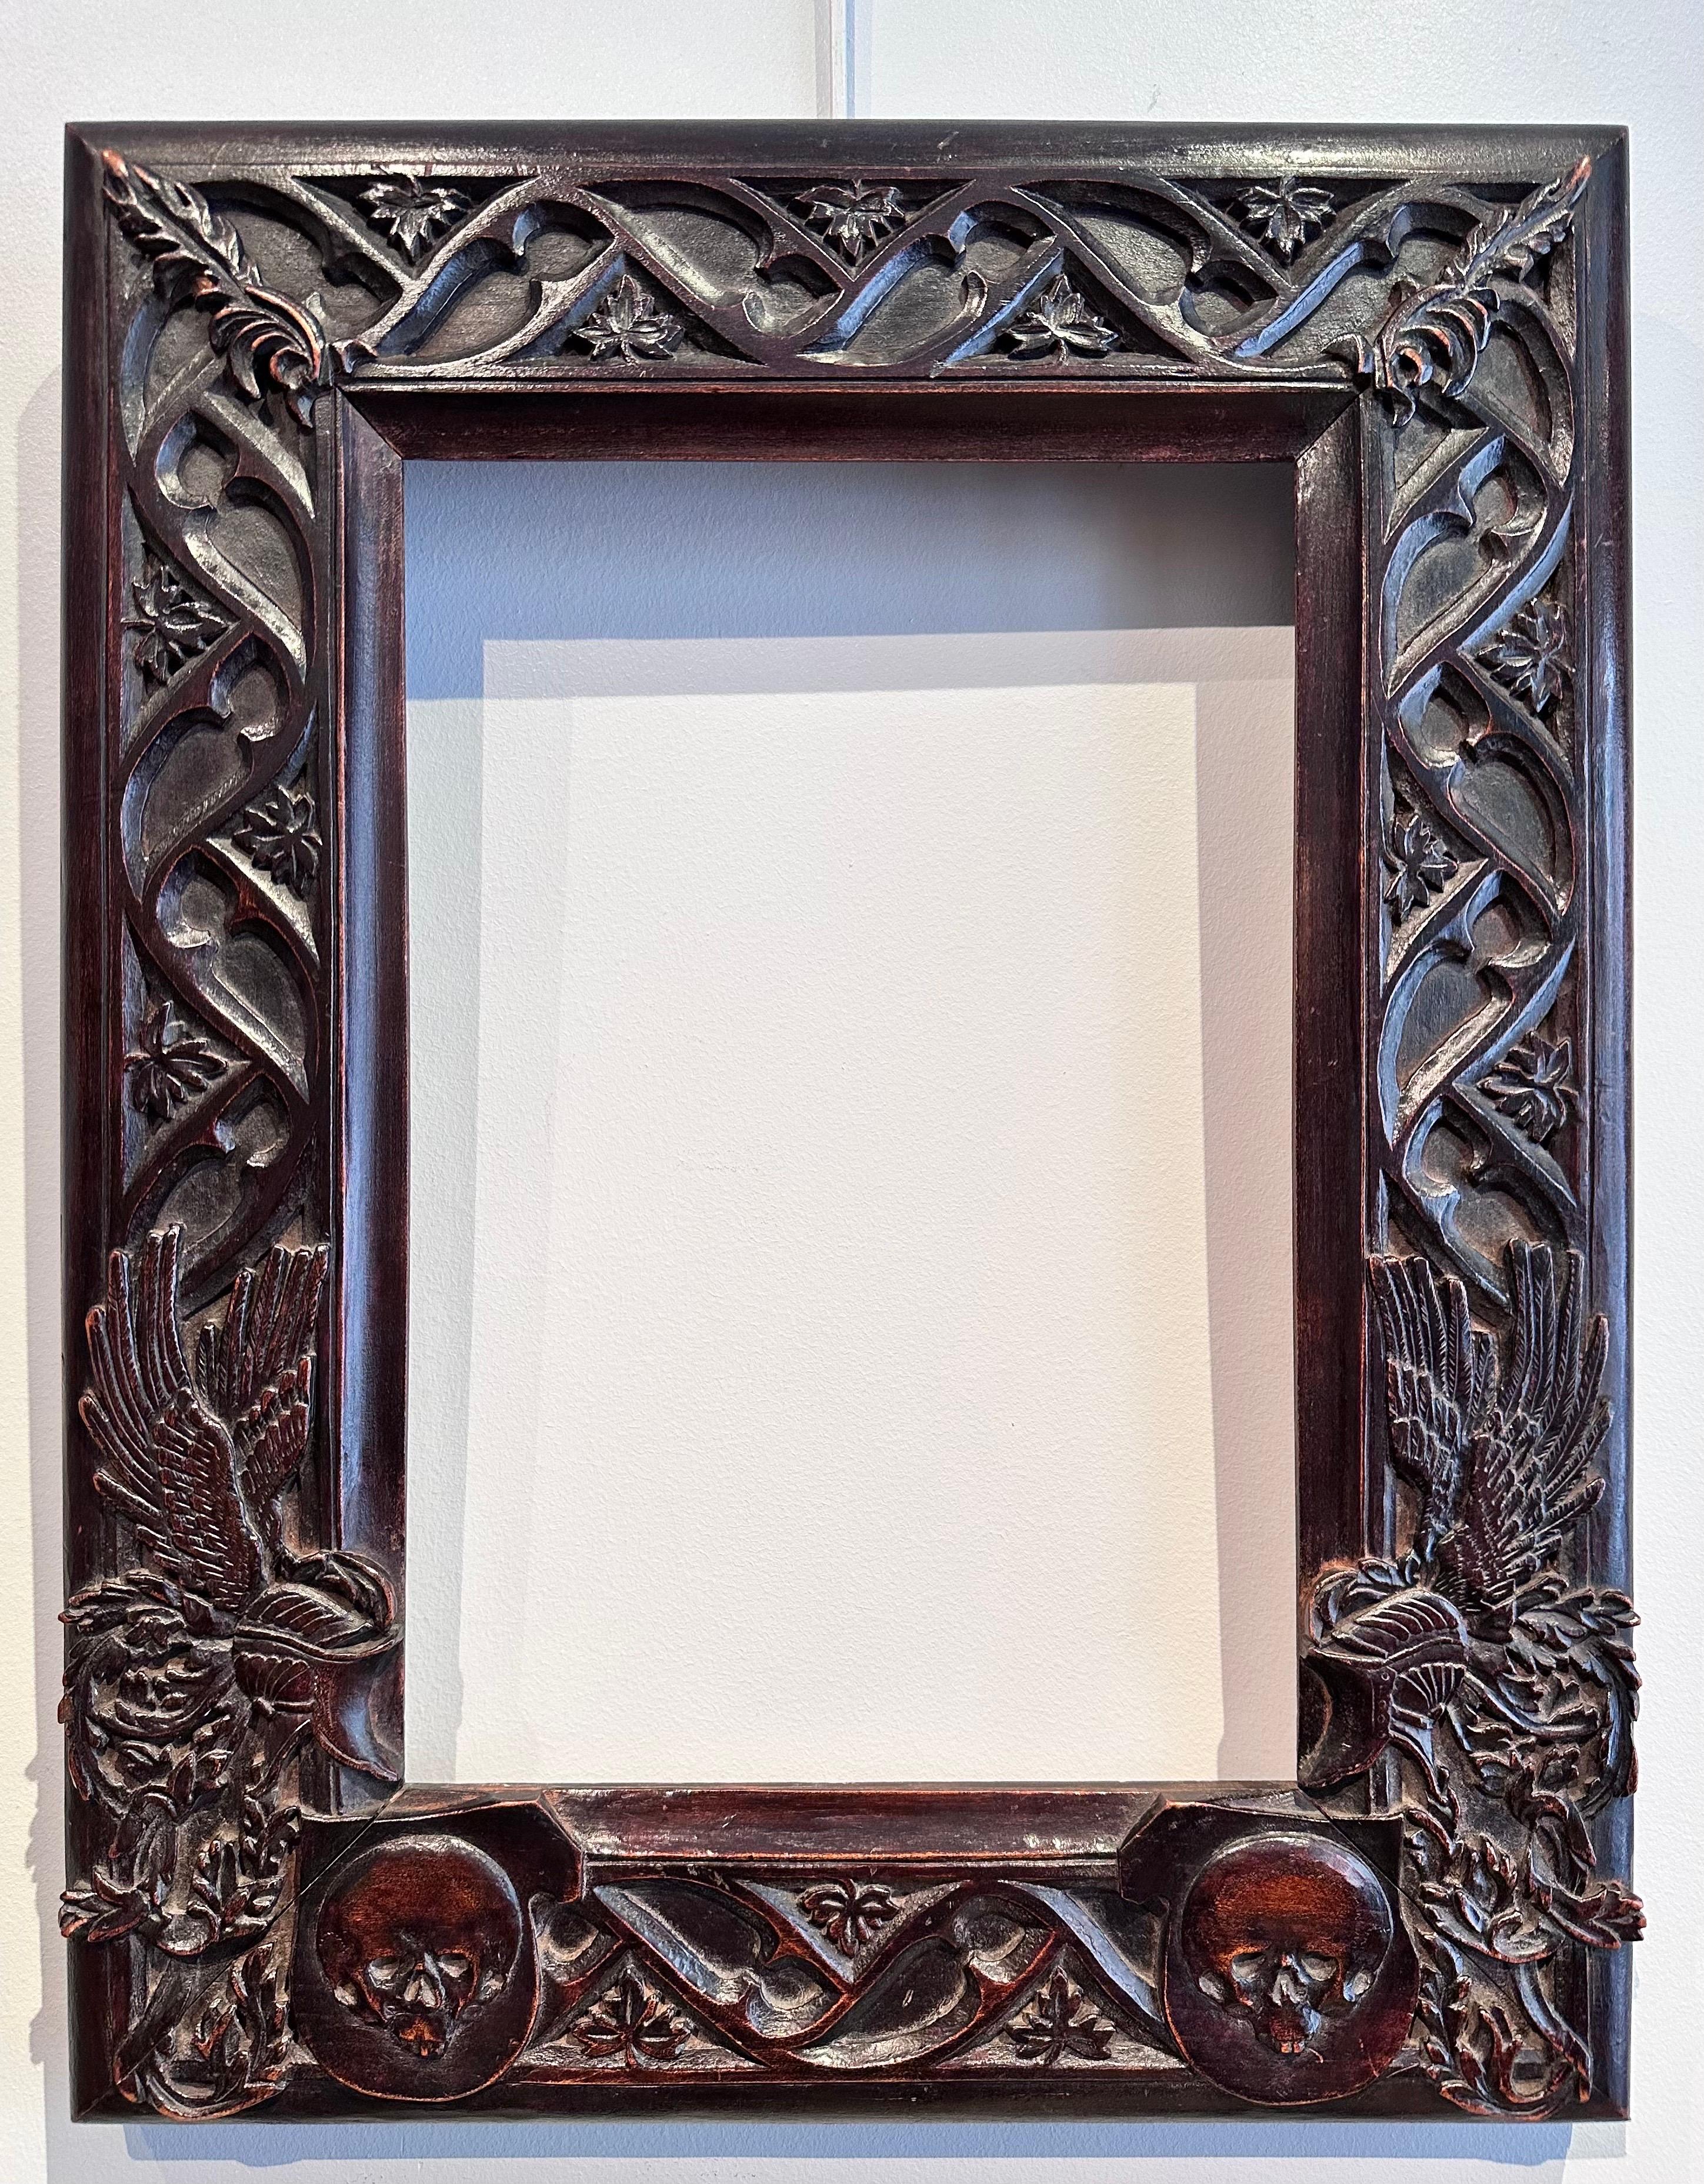 Gothic Revival “Skull” Frame, Carved Wood 19th 1860-1880 Specially Created for Dürer Engraving  For Sale